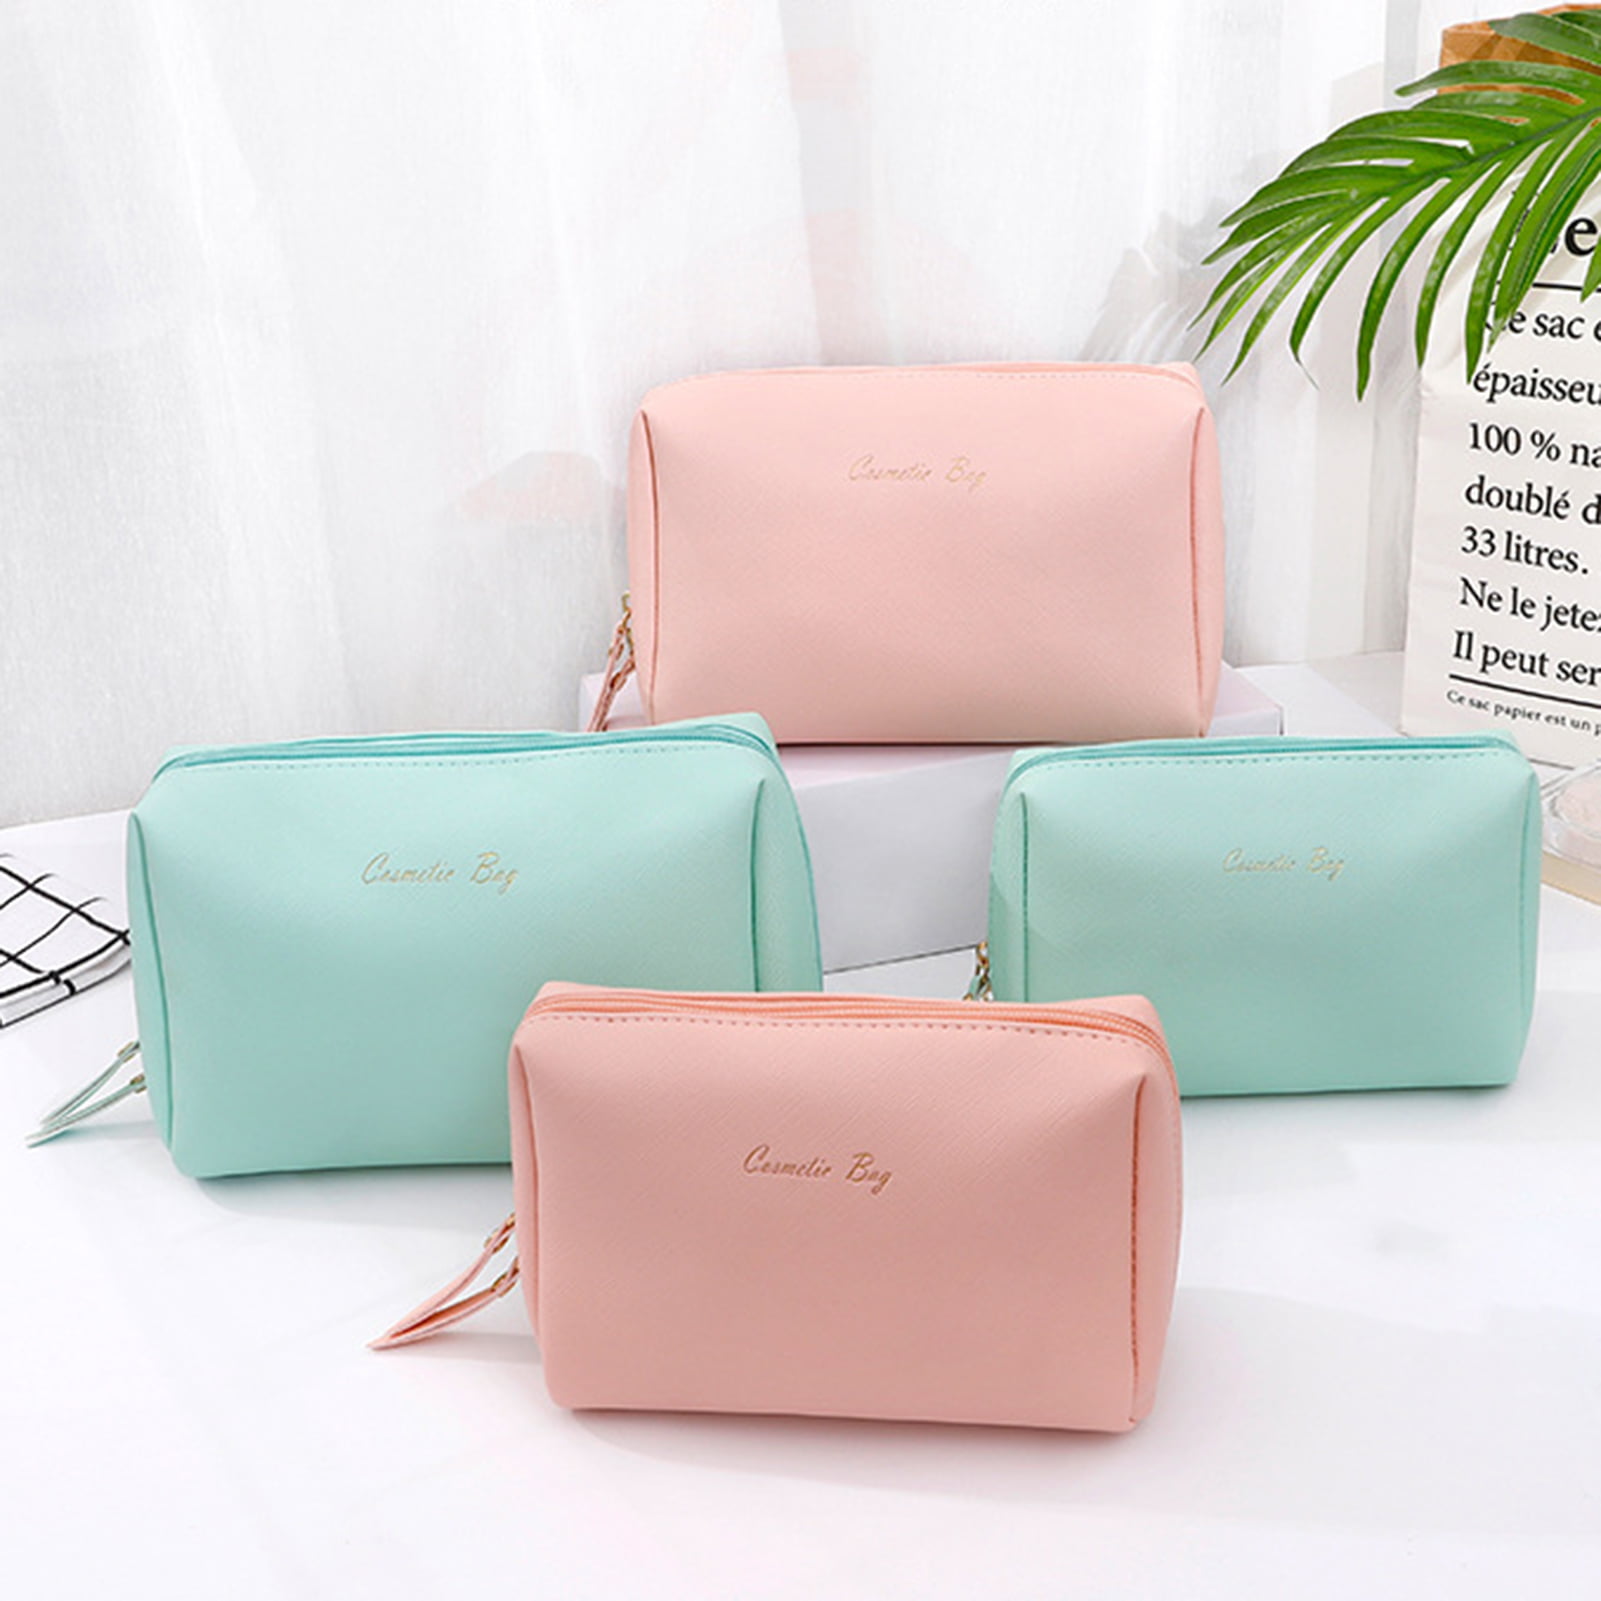  FRCOLOR Ladies Wallet Small Women Wallet Travel Toiletry Bag  Travel Necessities Traveling Essentials Travel Cosmetic Bag Makeup Bag for  Travel Portable Makeup Bag Miss Advanced Pu Leather : Beauty & Personal